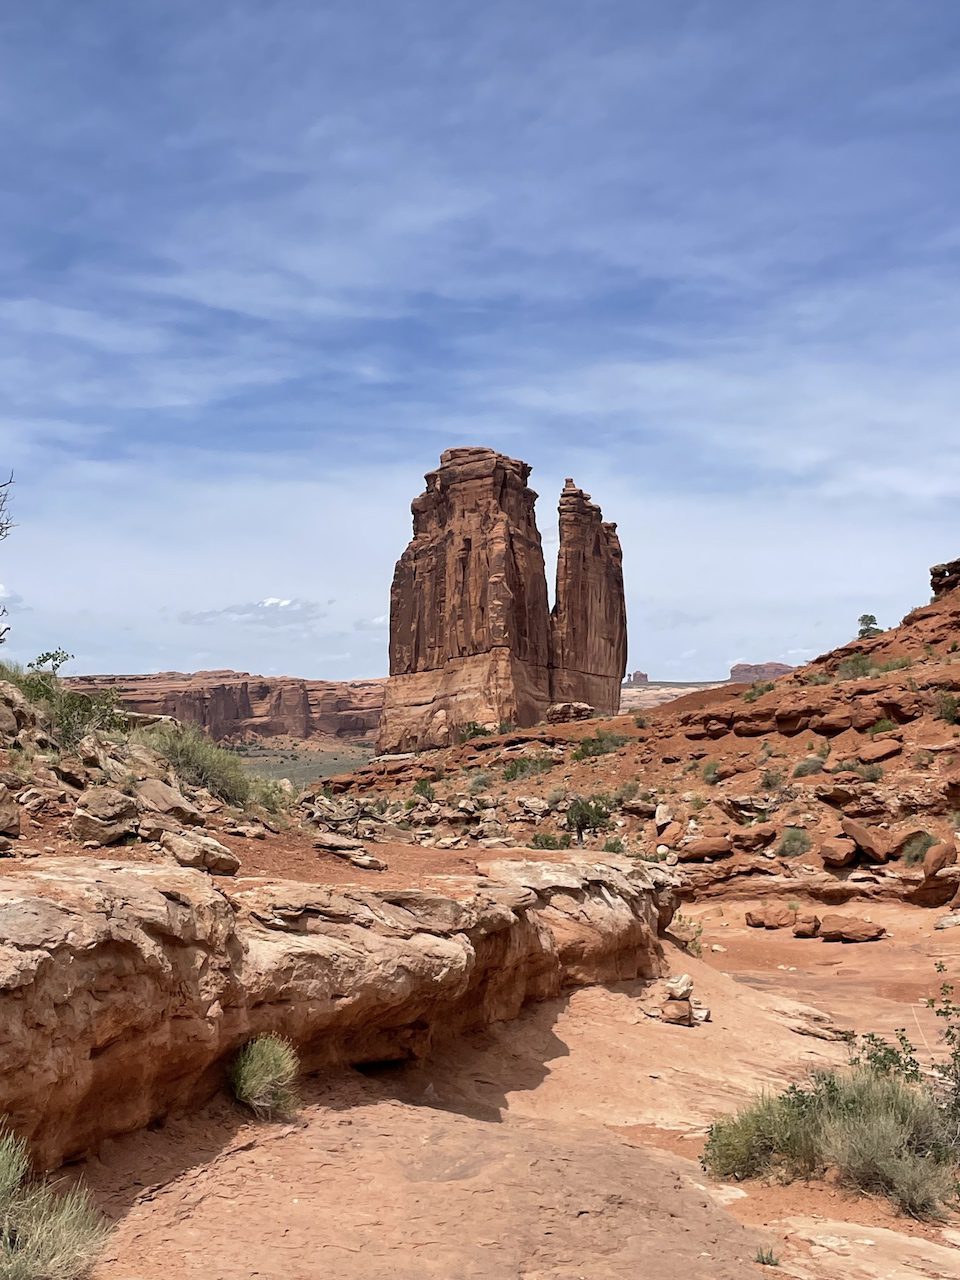 does arches national park require a reservation for entry?